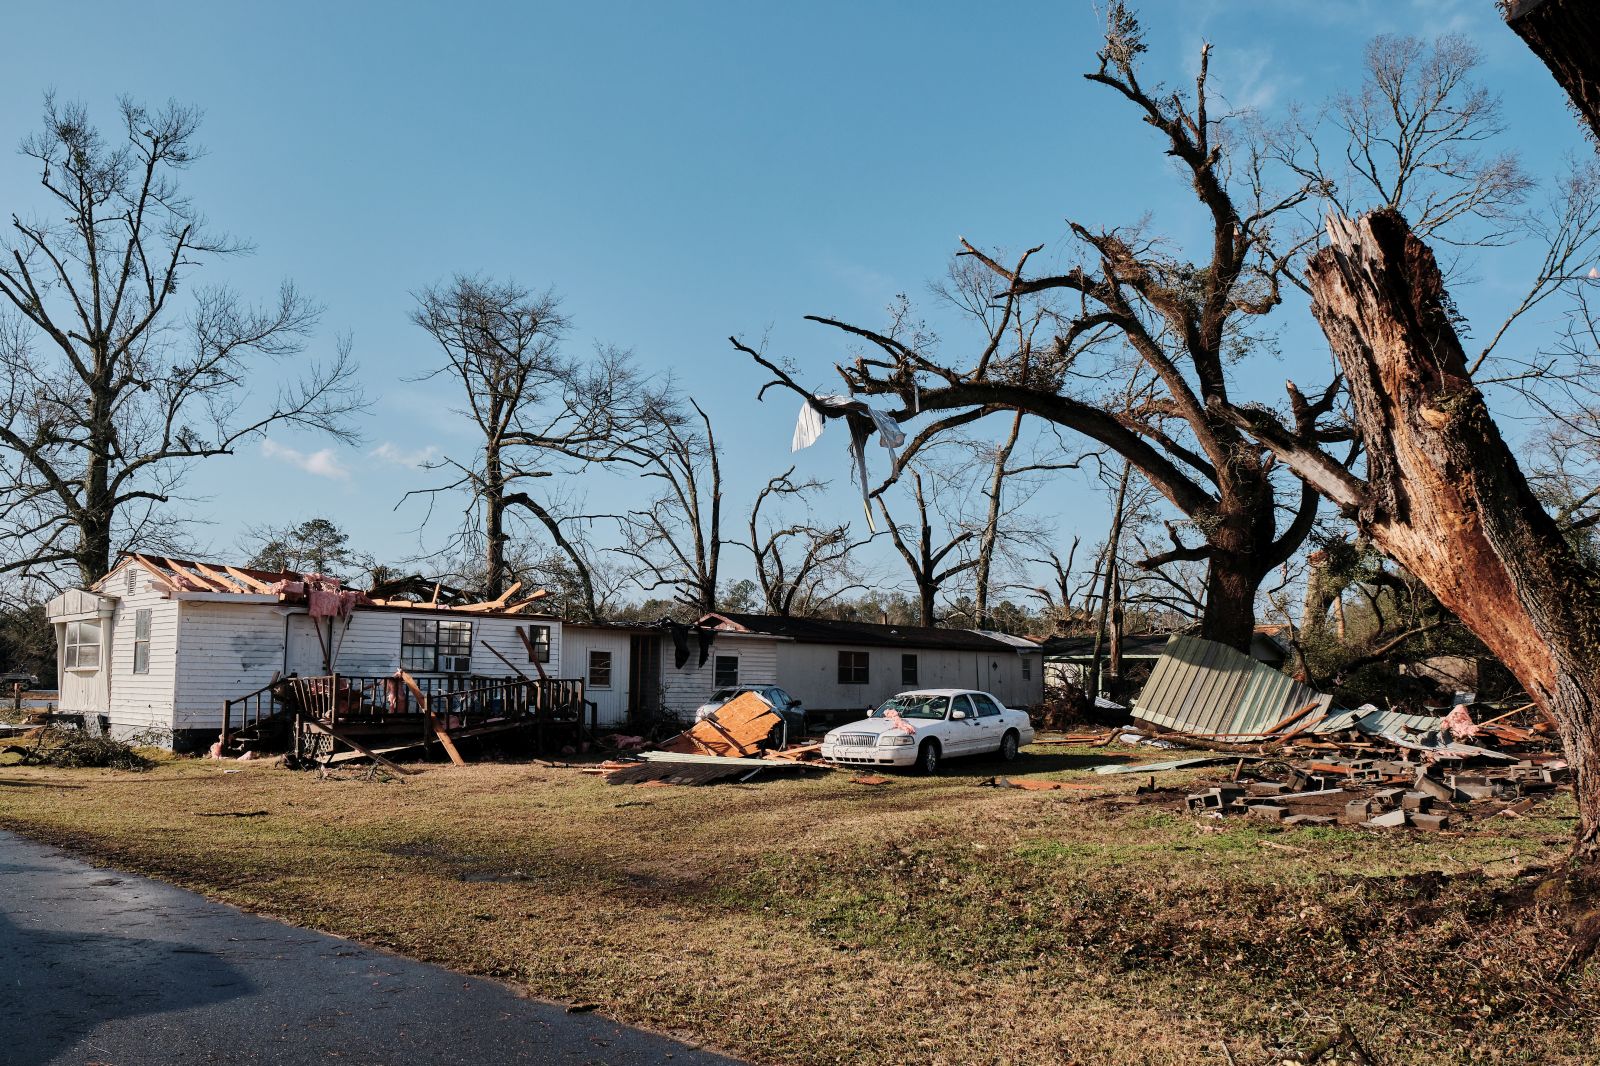 epa10402276 A trailer home with the roof ripped off from a tornado sits among the damage from a run of storms making their way through the South East of the US, in Mount Vernon, Alabama, USA, on 12 January 2023.  EPA/DAN ANDERSON